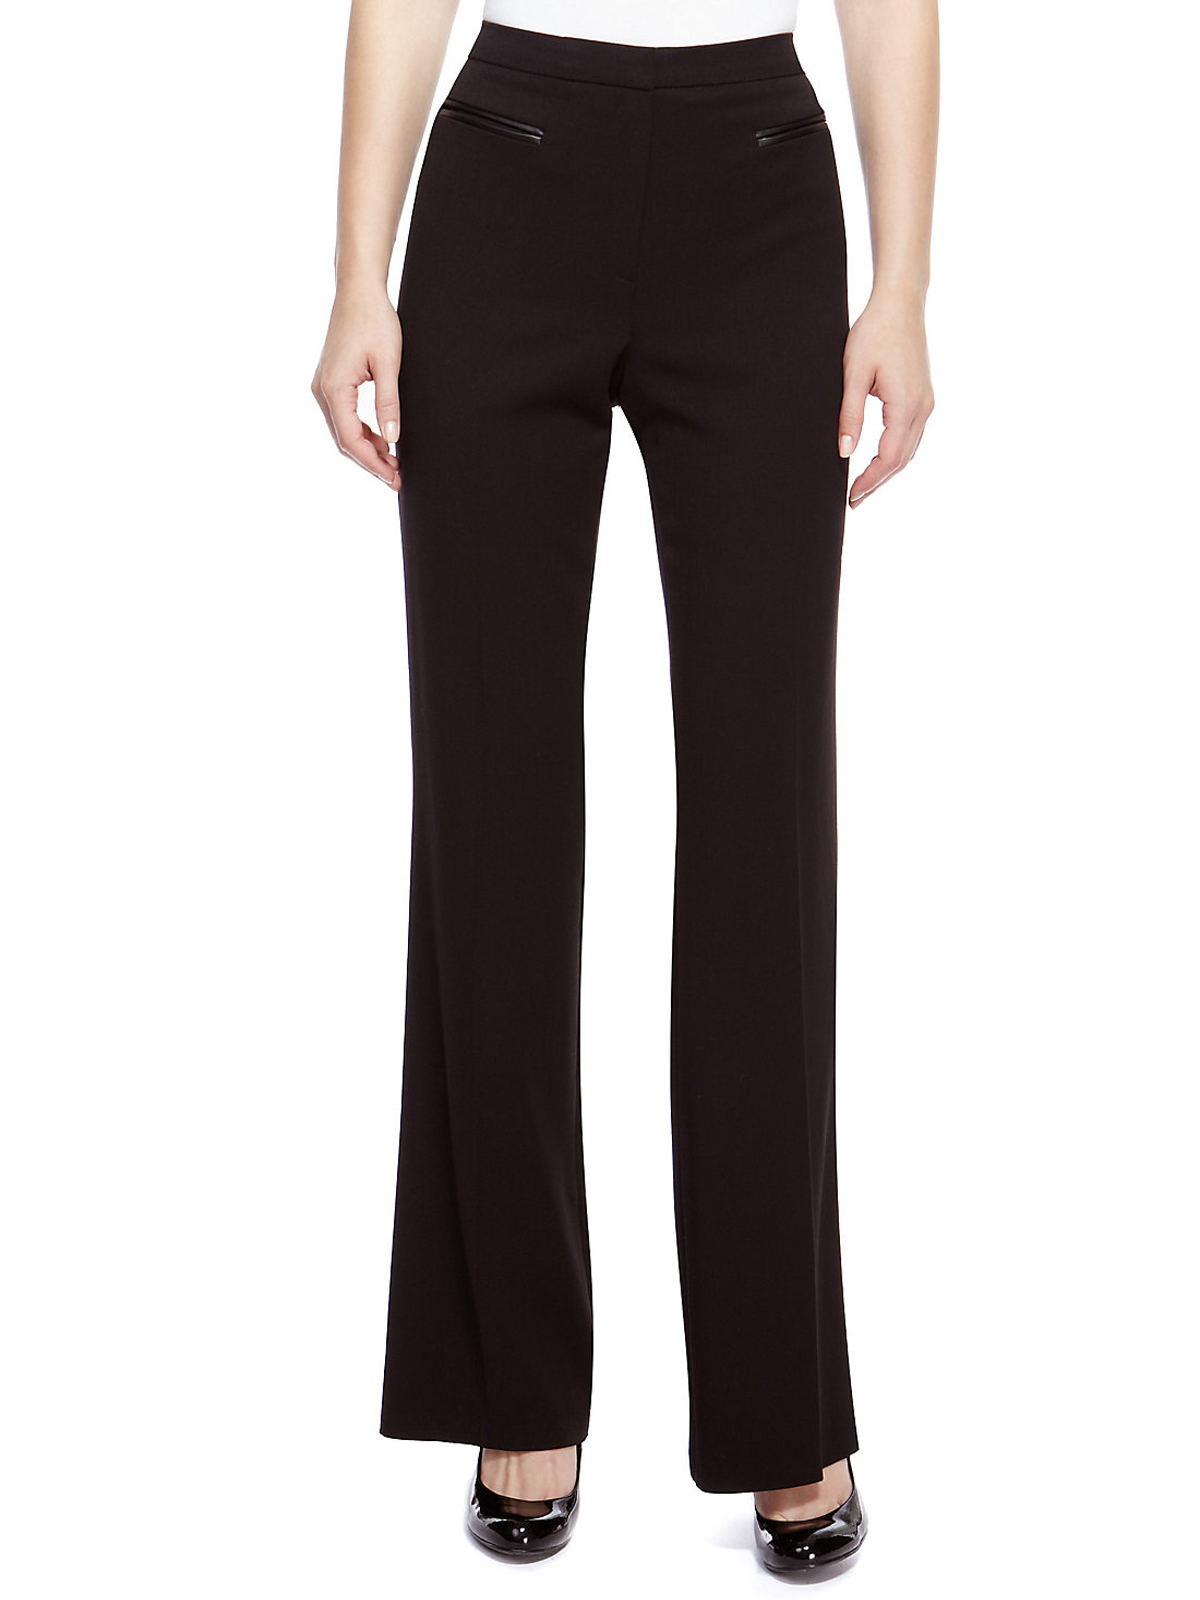 Marks and Spencer - - M&5 ASSORTED Ladies Trousers - Size 10 to 18